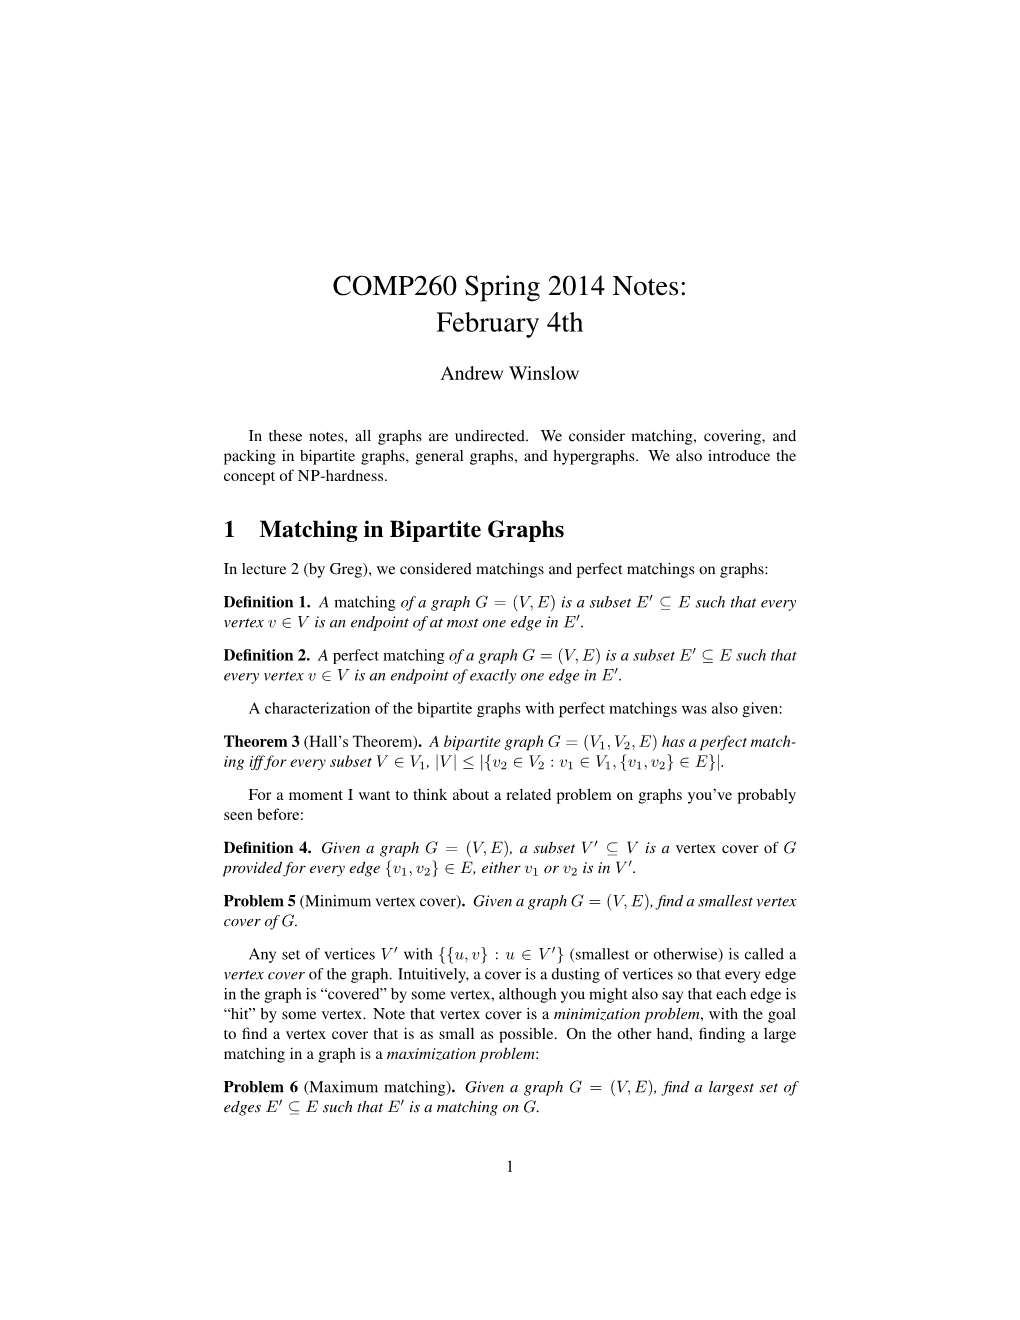 COMP260 Spring 2014 Notes: February 4Th